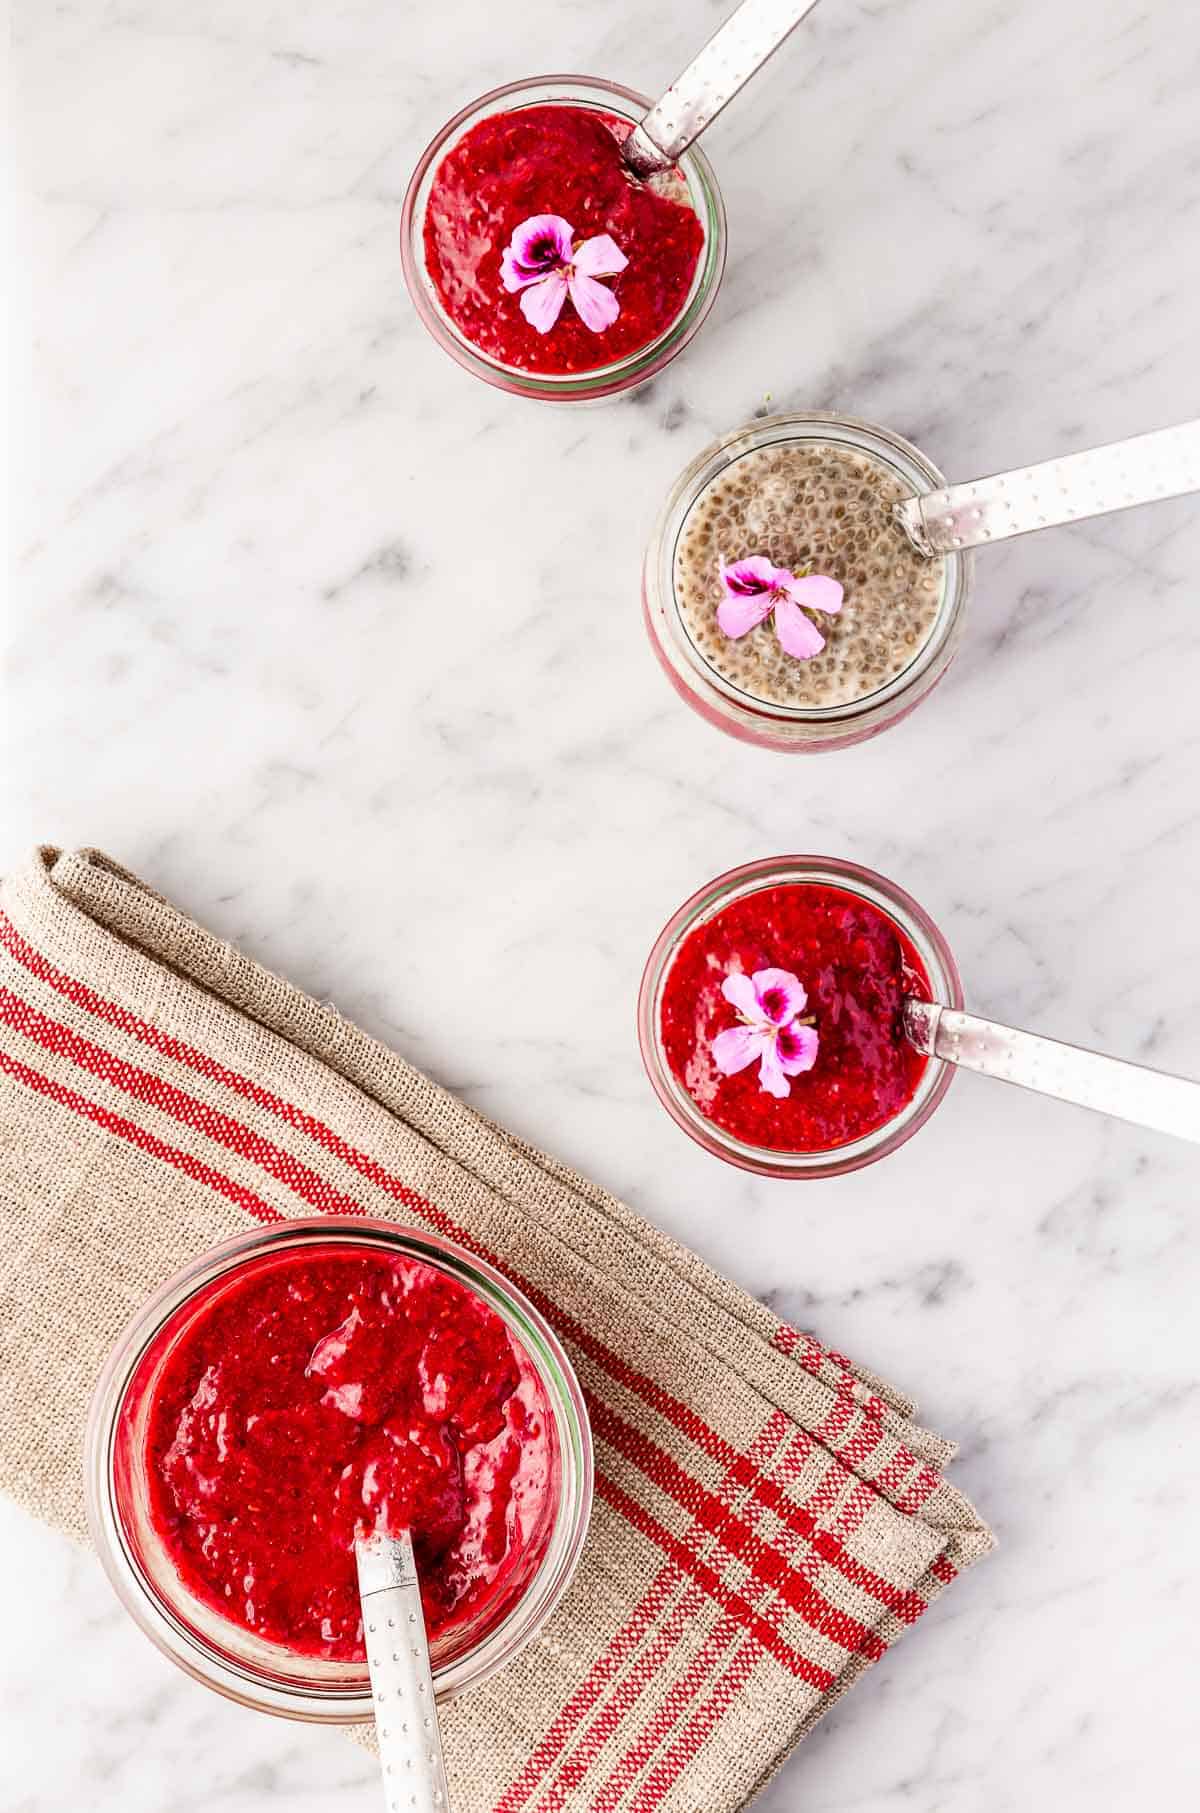 A jar of chia jam on a red striped napkin surrounded by three smaller jars of chia pudding with the jam in them.